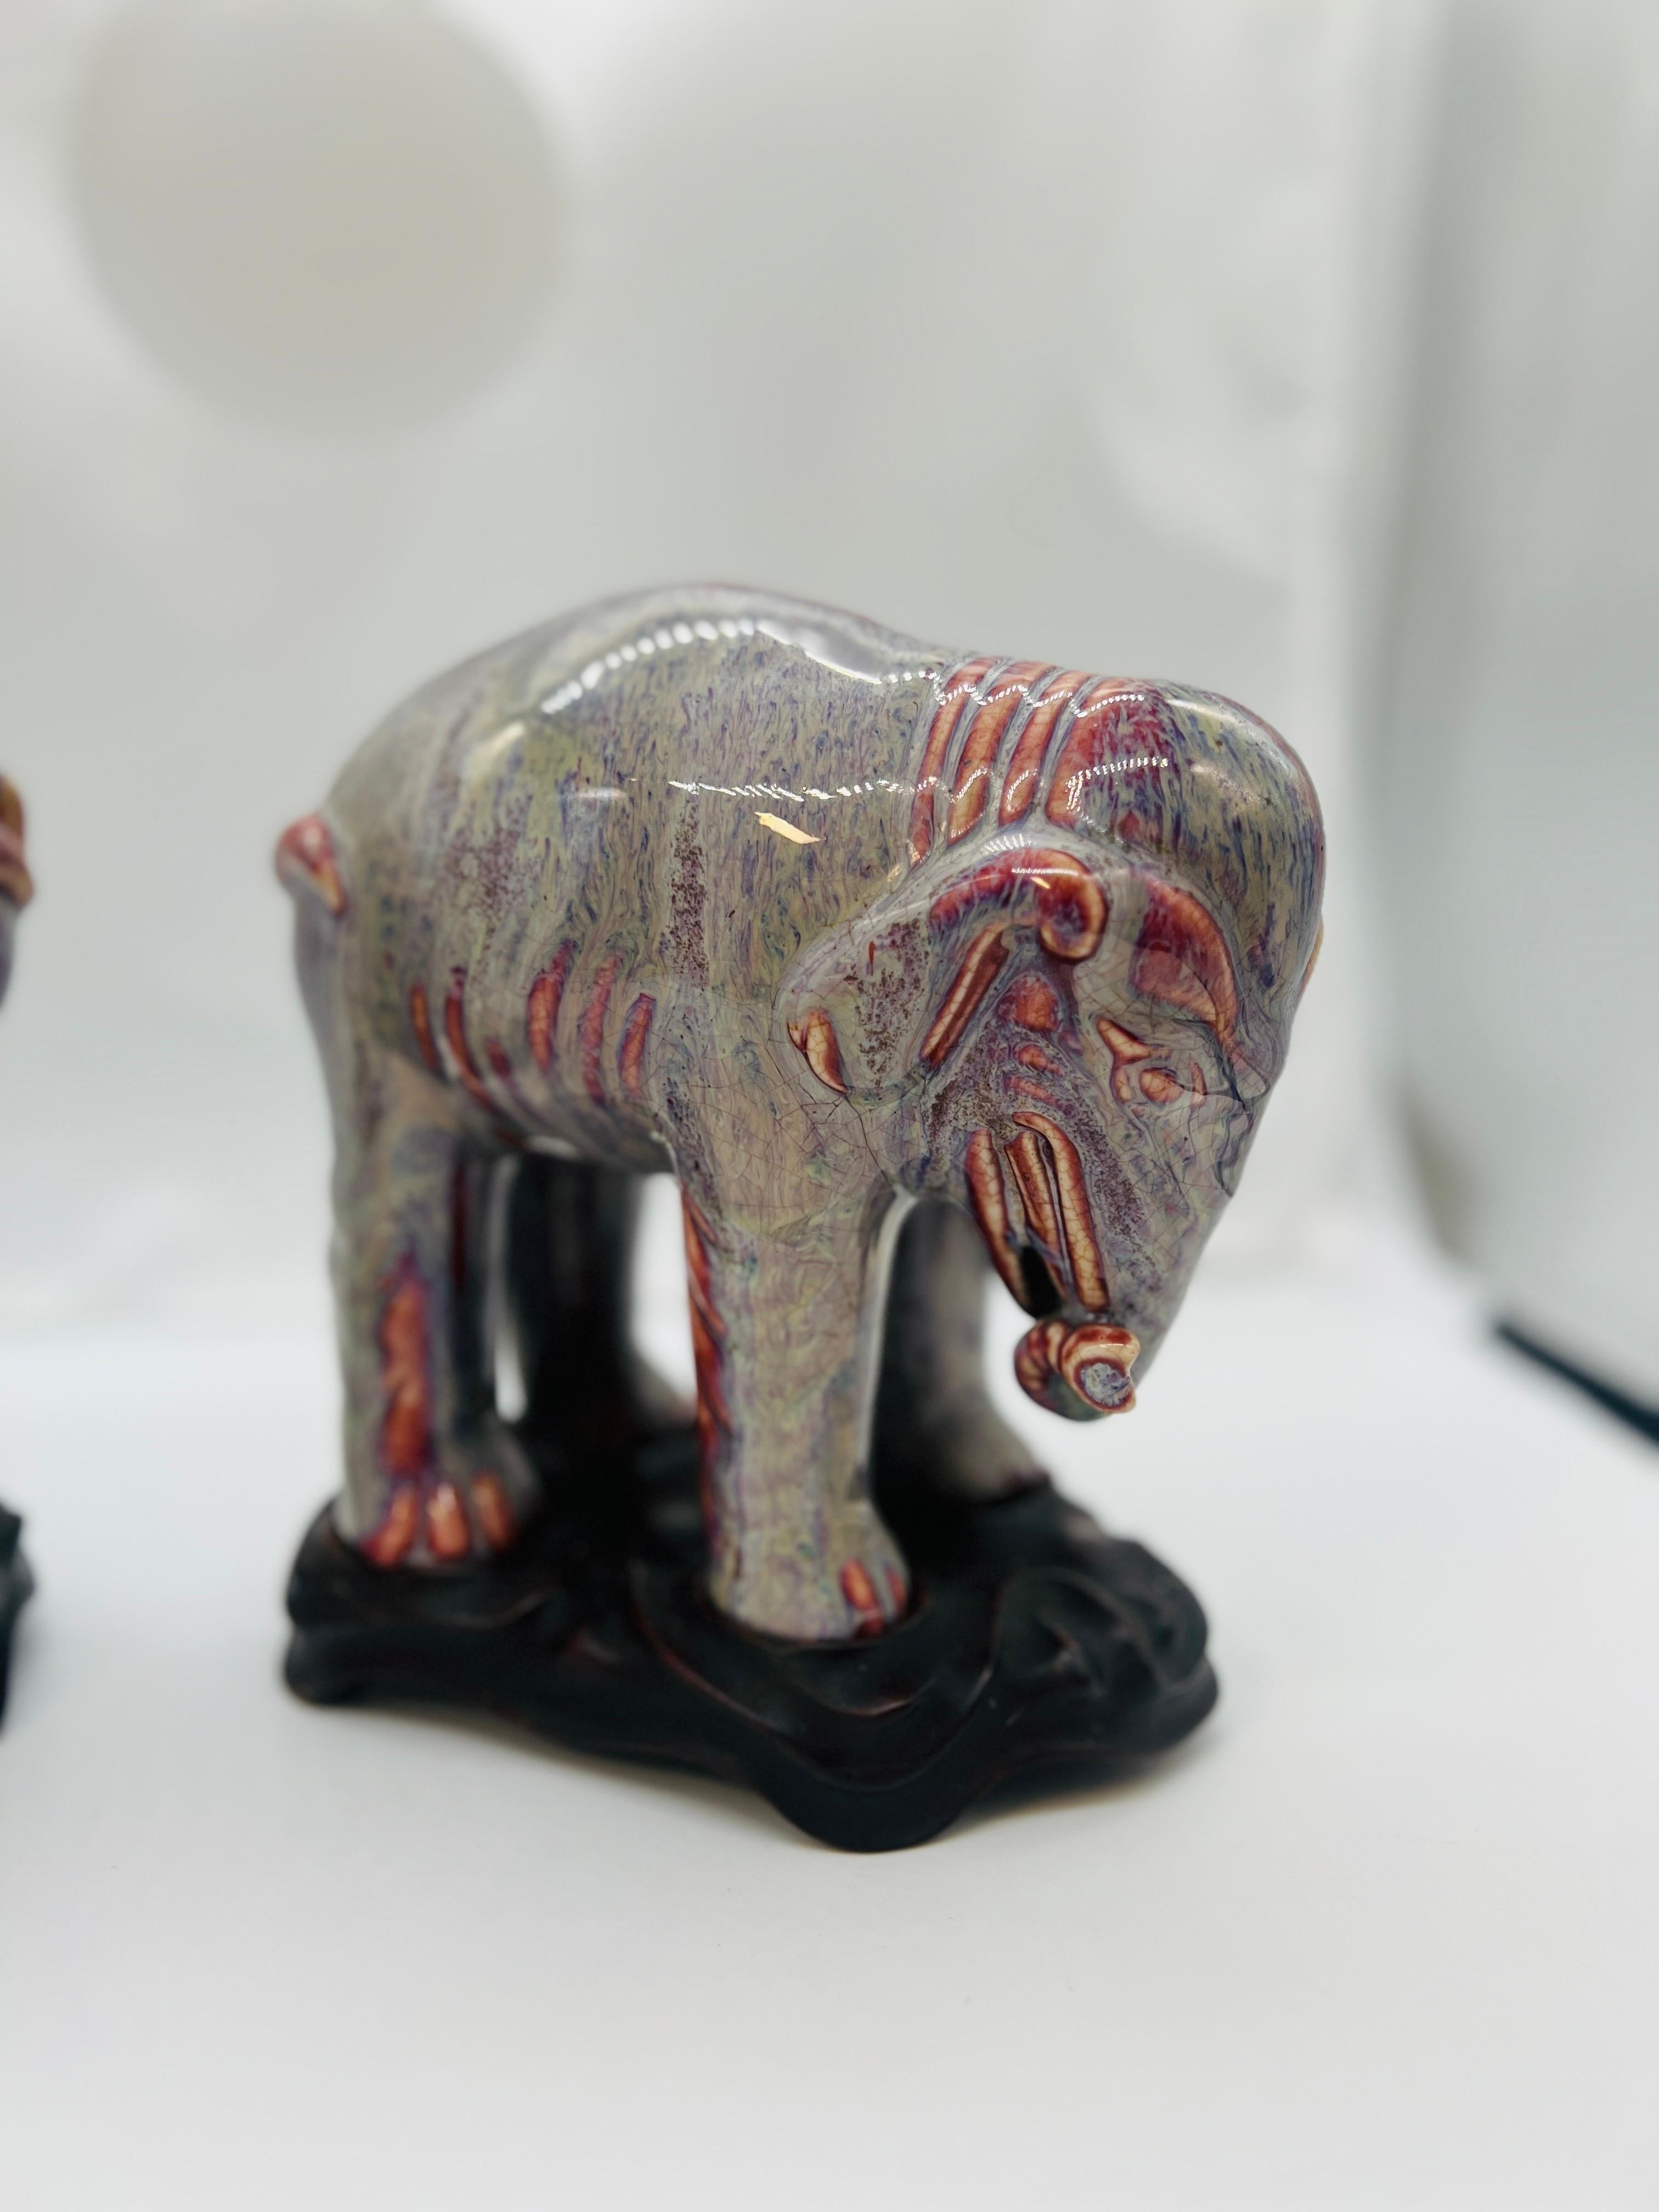 Chinese, 19th century or earlier.

A PAIR OF CHINESE PORCELAIN FLAMBE-GLAZED ELEPHANTS. 

Each elephant is a modeled mirror image - with an arched back and curling trunk. The entire piece having a craquelure flambe glaze in a VERY unique color